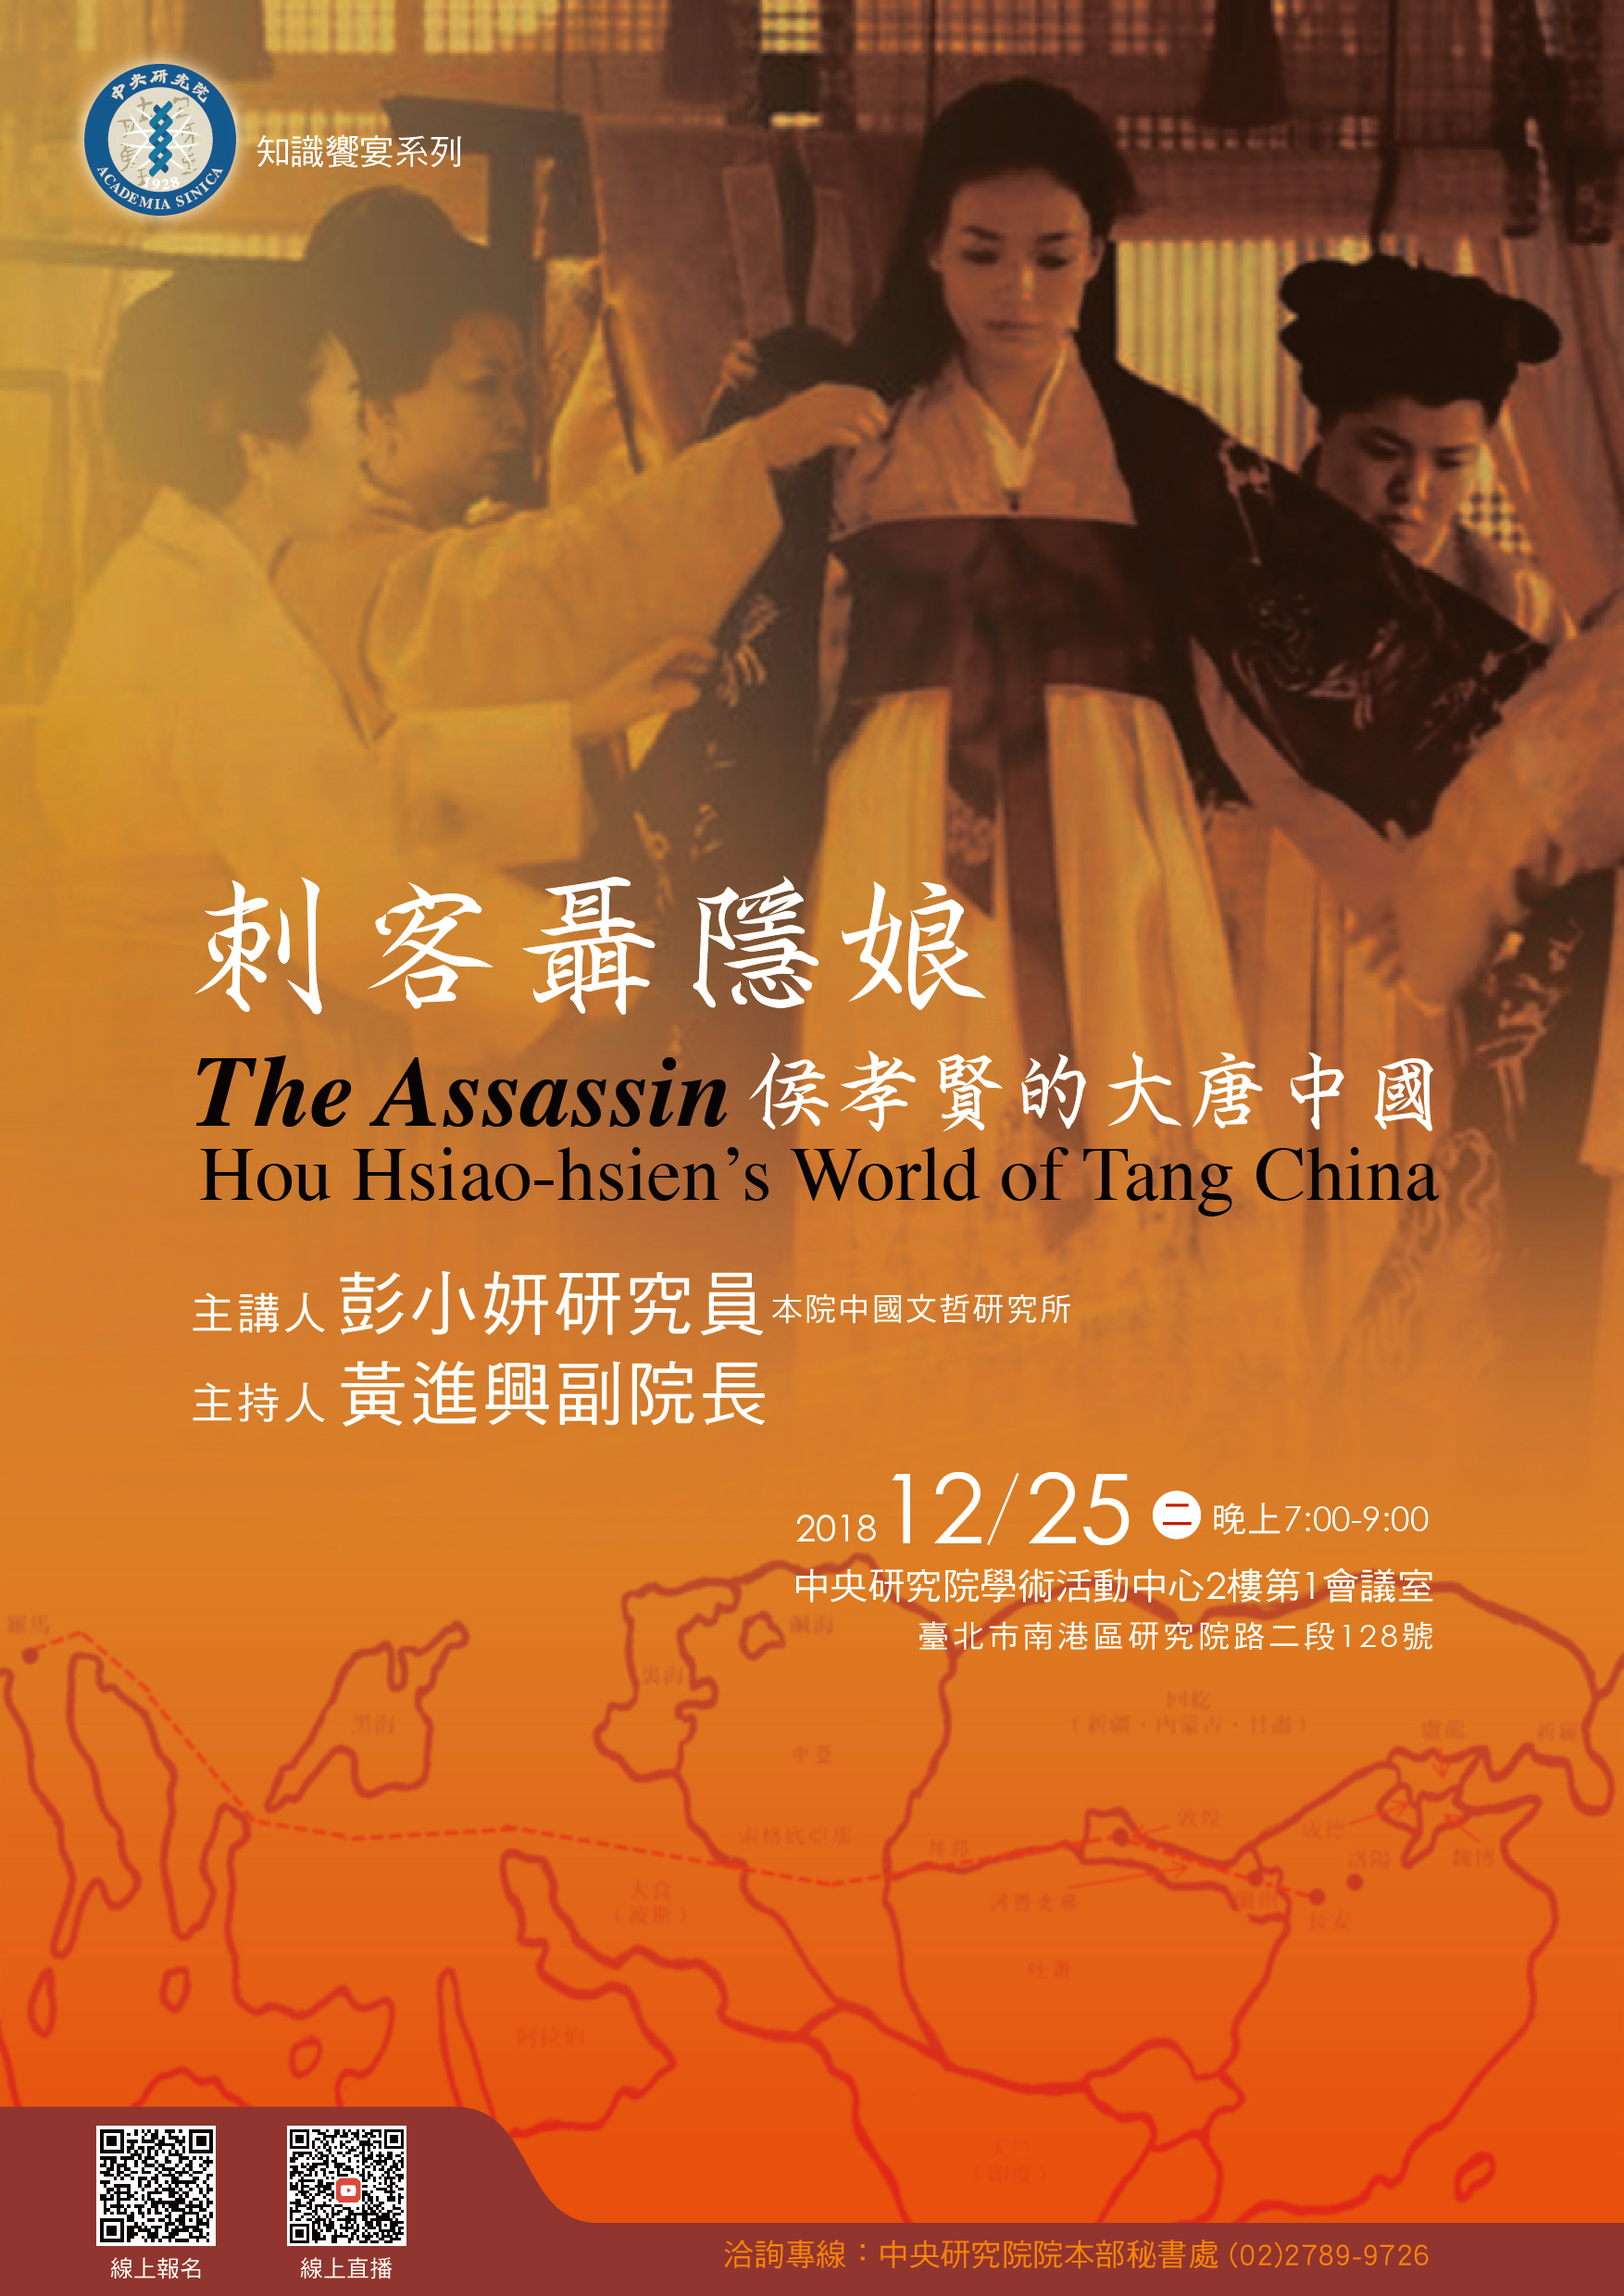 The Assassin: Hou Hsiao-hsien’s World of Tang China